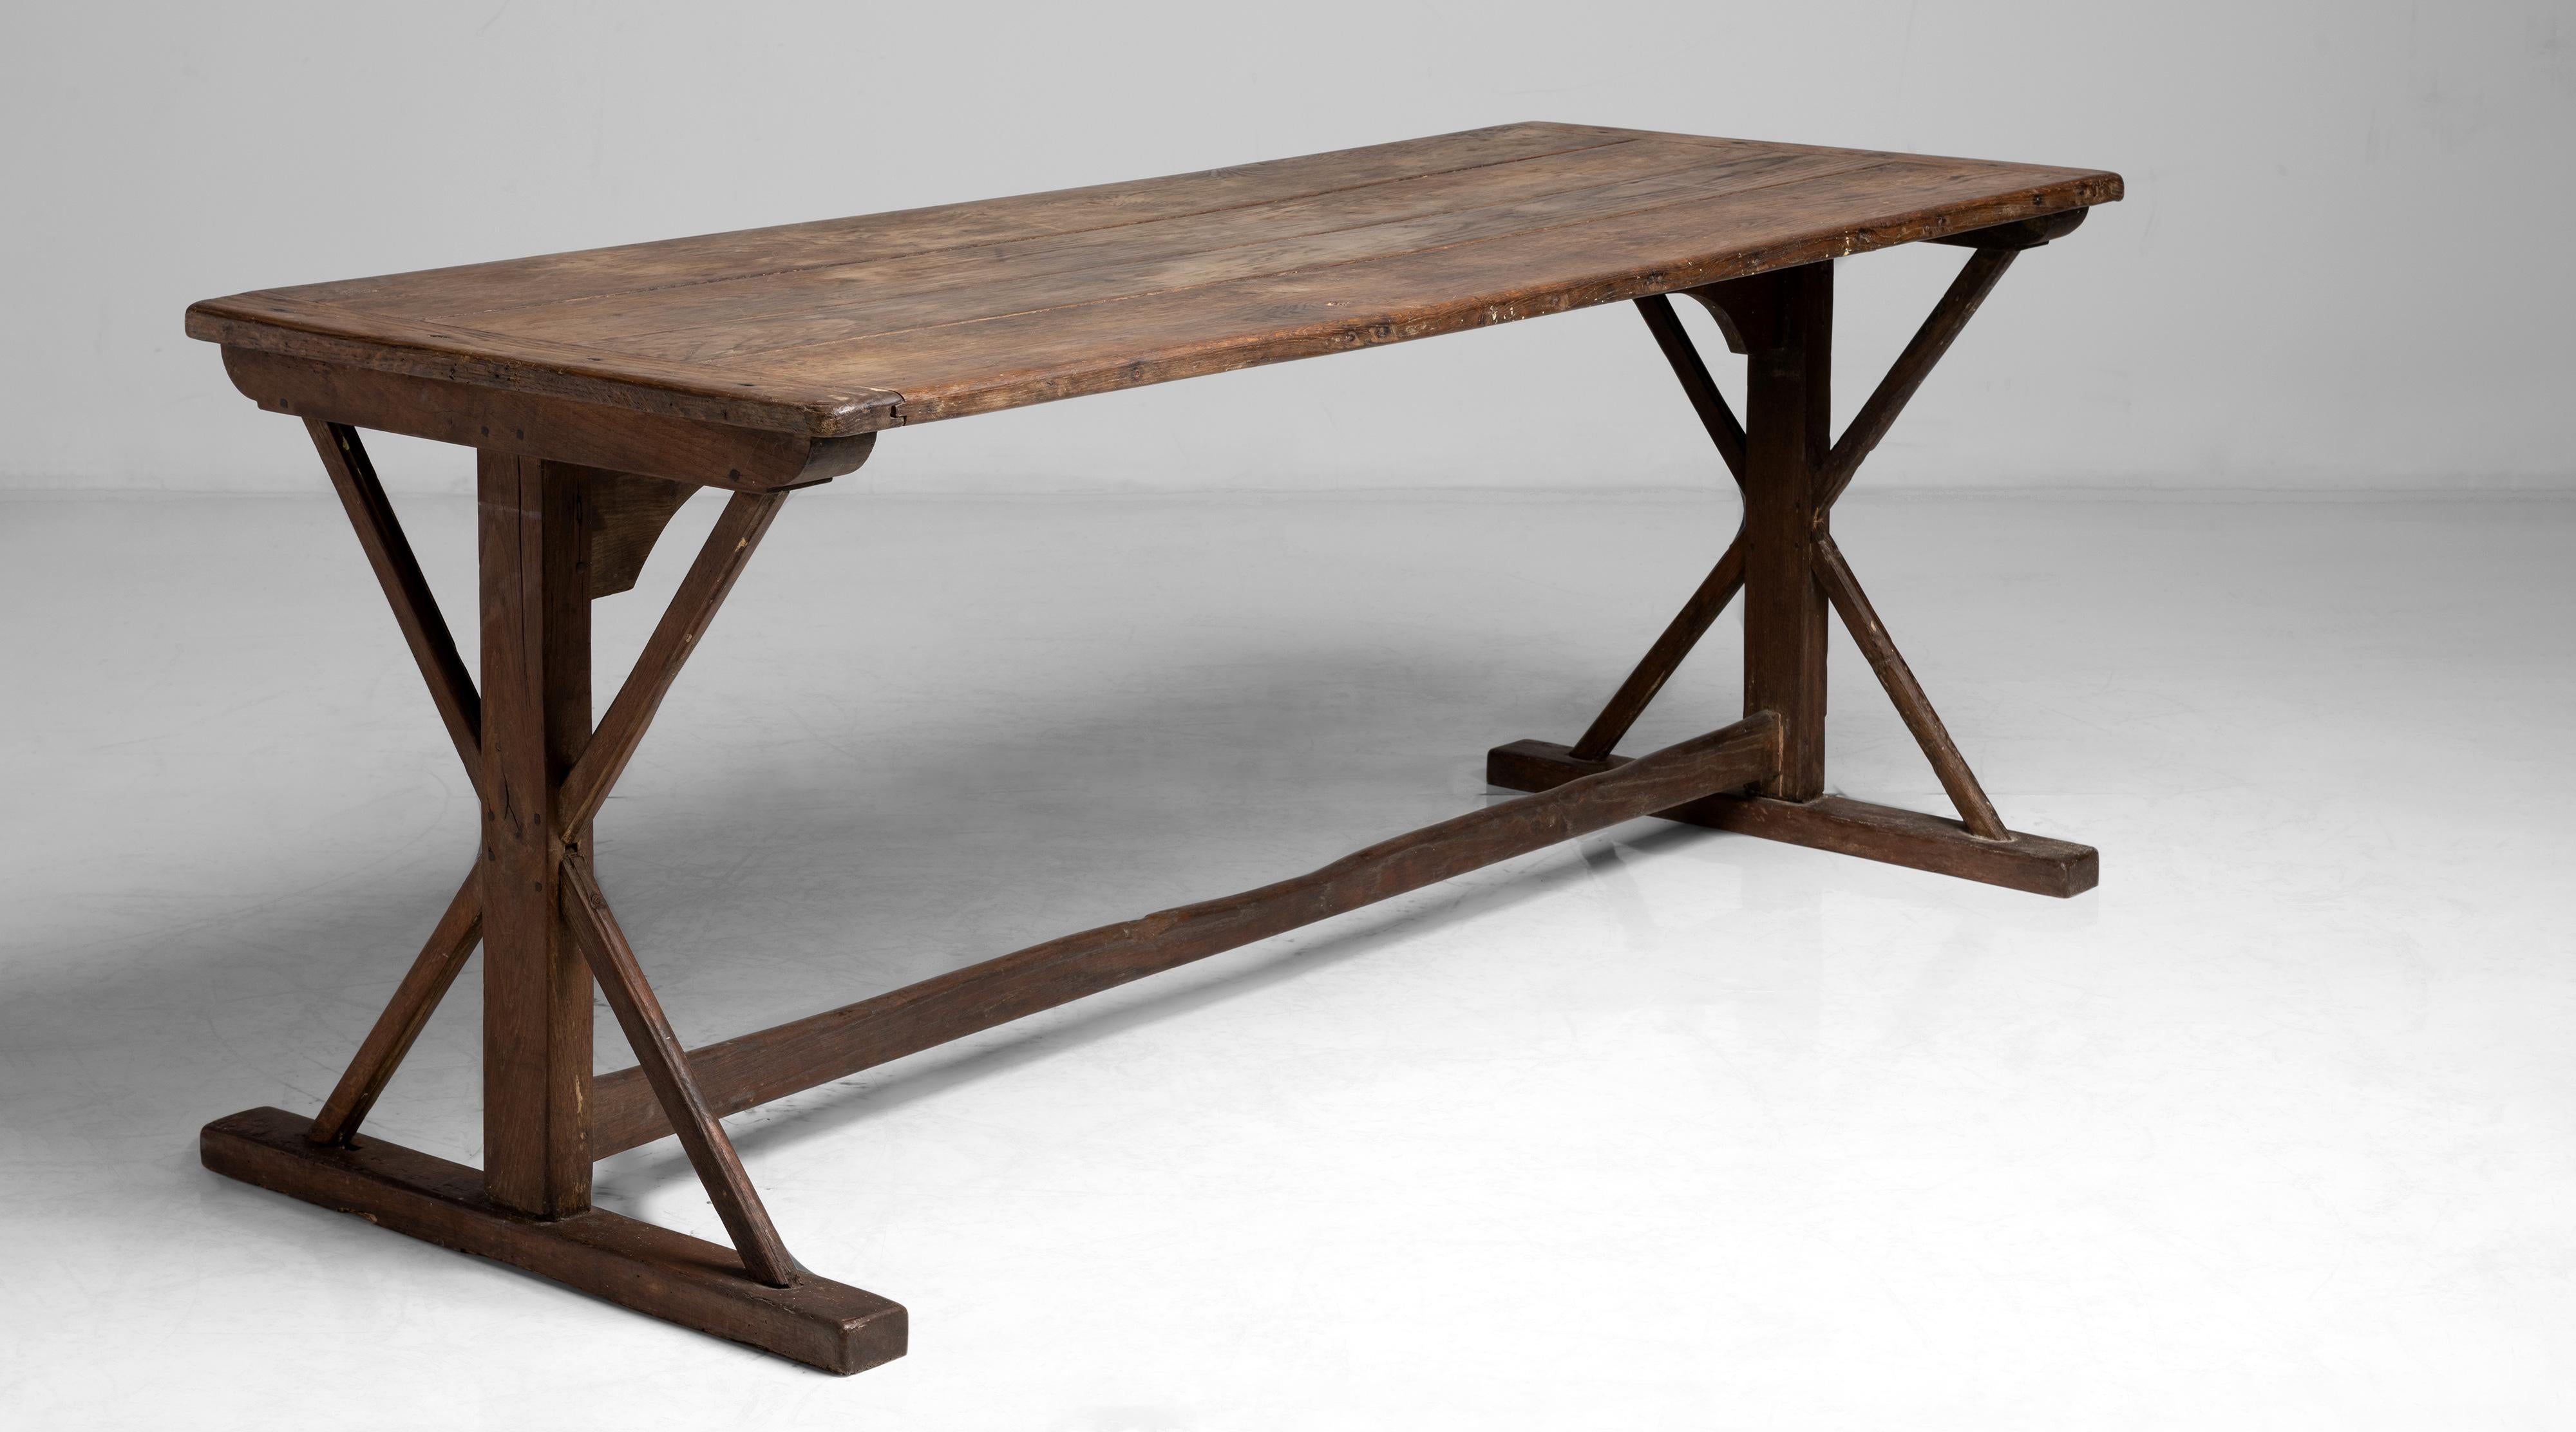 X-Frame tavern table
England, circa 1890
Constructed in oak with natural patin.
Measures: 72”L x 28.5”D x 27.75”H.
 